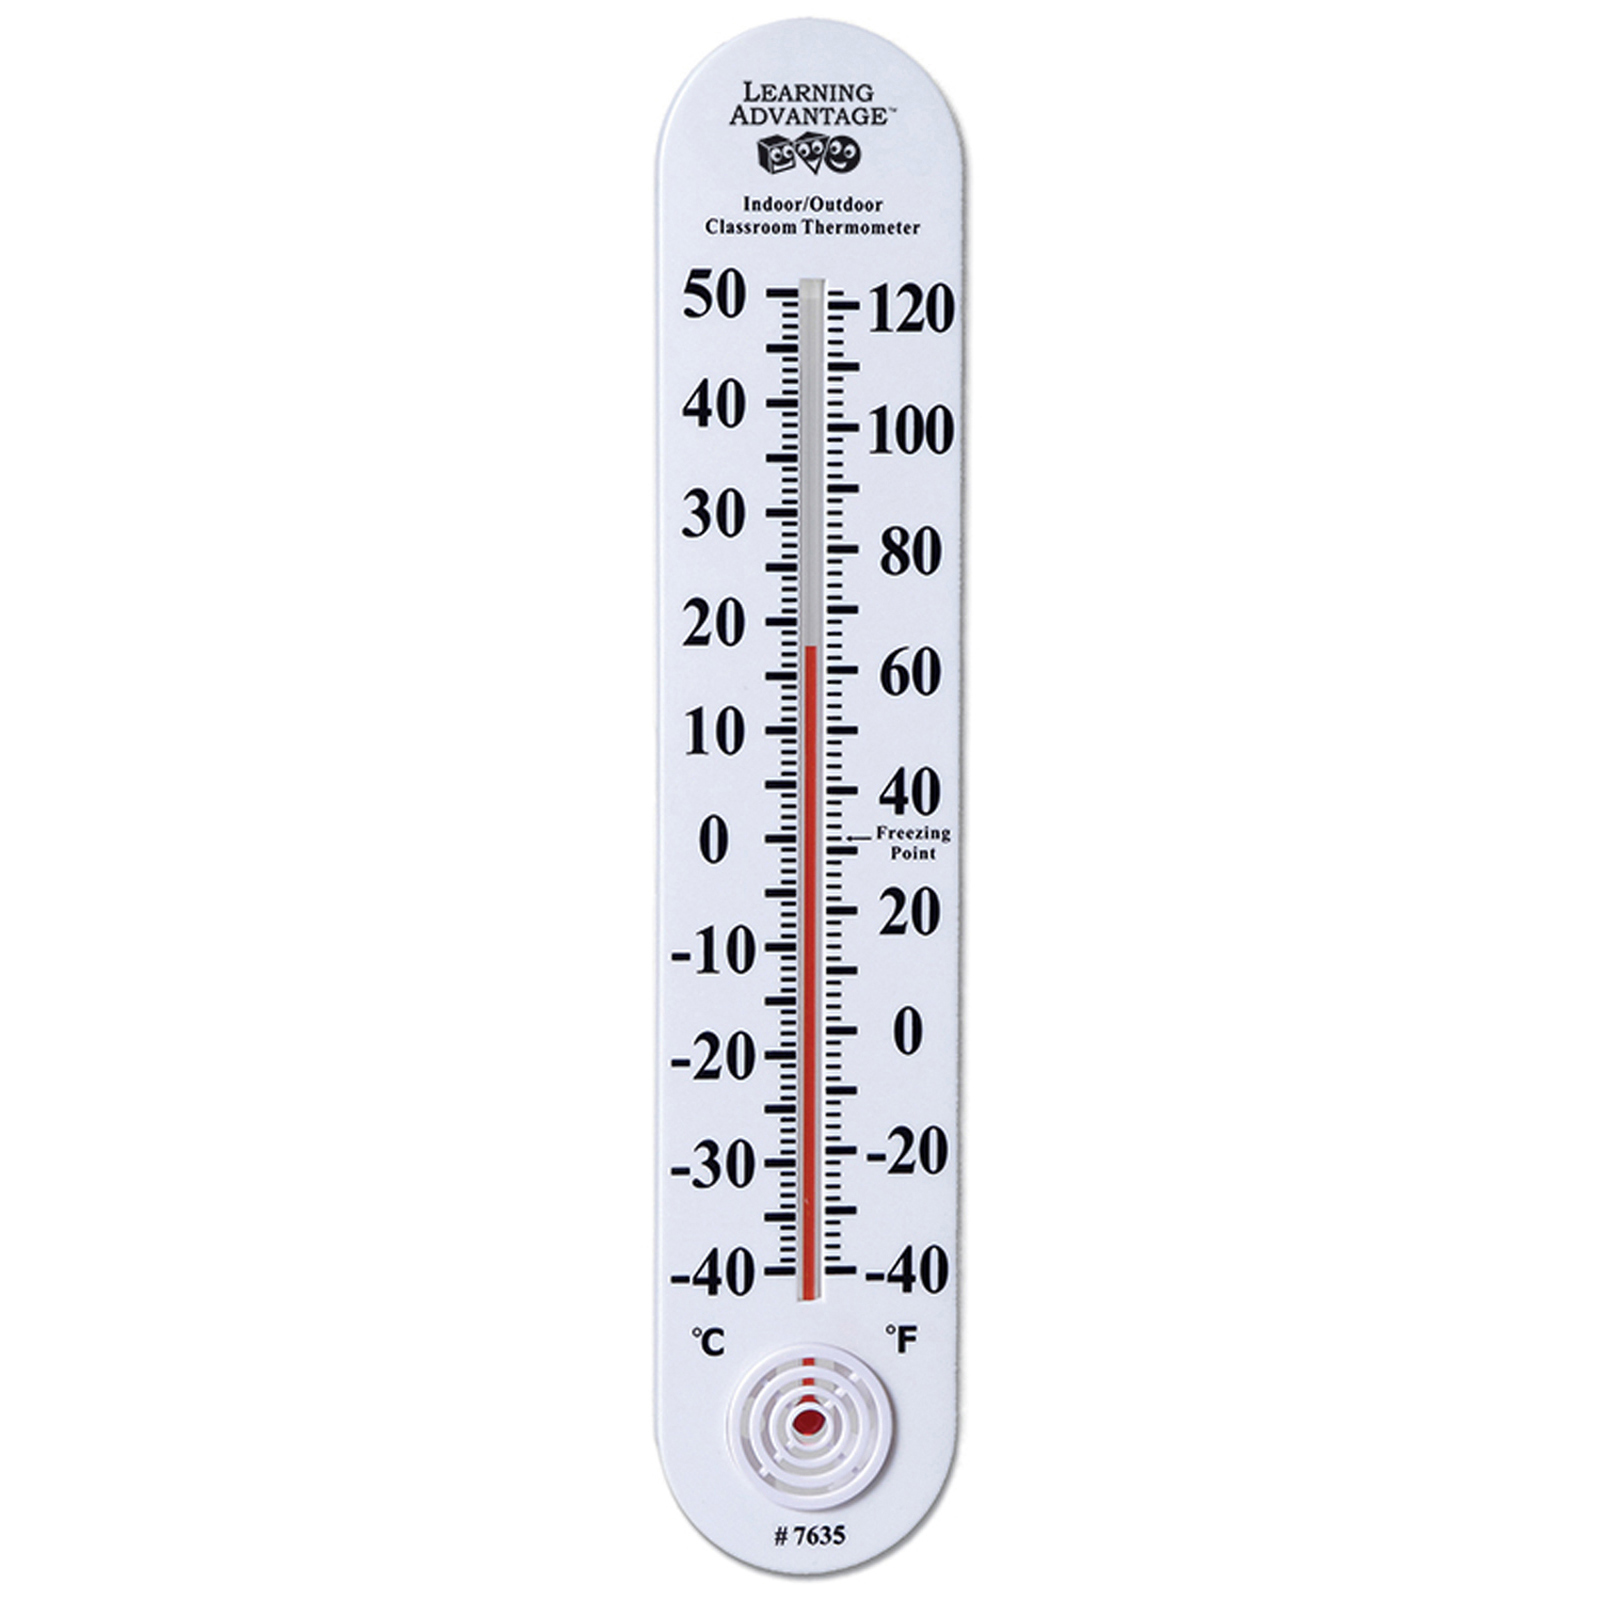 7635 Learning Advantage 15" Indoor/Outdoor Classroom Thermometer